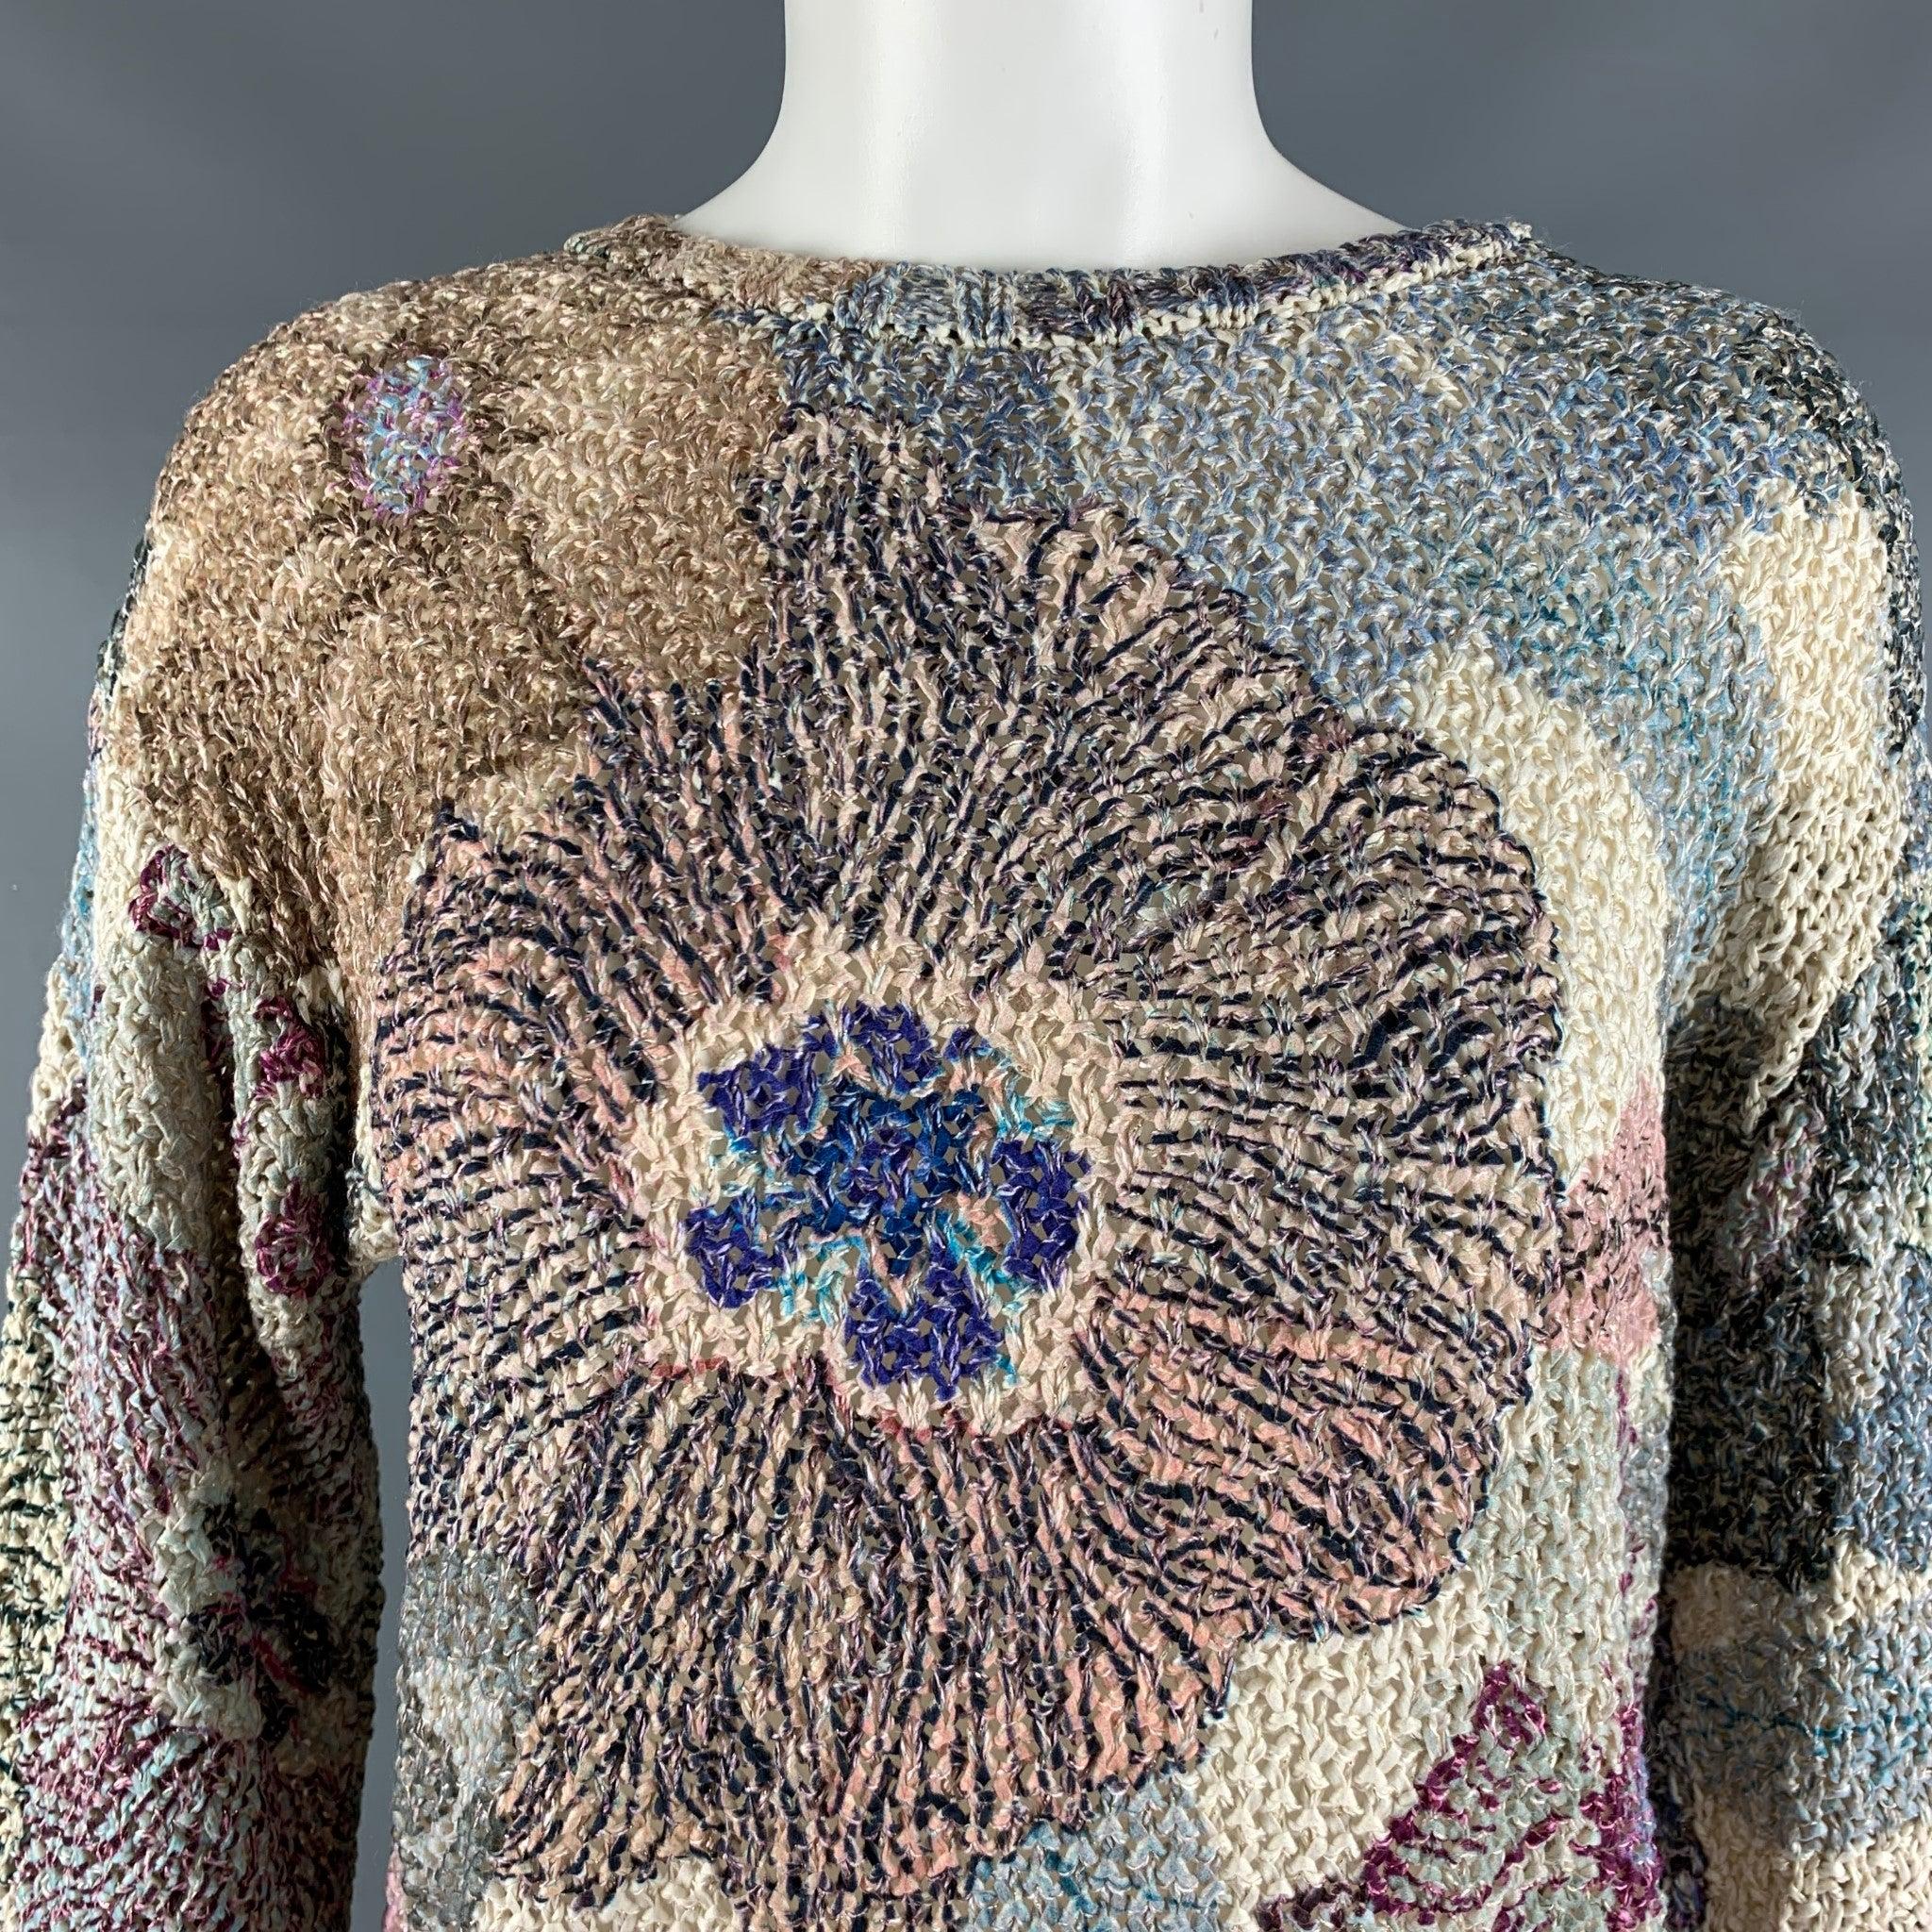 ETRO pullover in a beige cotton blend knit, featuring an all over multicolor floral pattern, and crew neck. Made in Italy.Excellent Pre-Owned Condition. 

Marked:   38 

Measurements: 
 
Shoulder: 17.5 inches Bust: 36 inches Sleeve: 22.5 inches